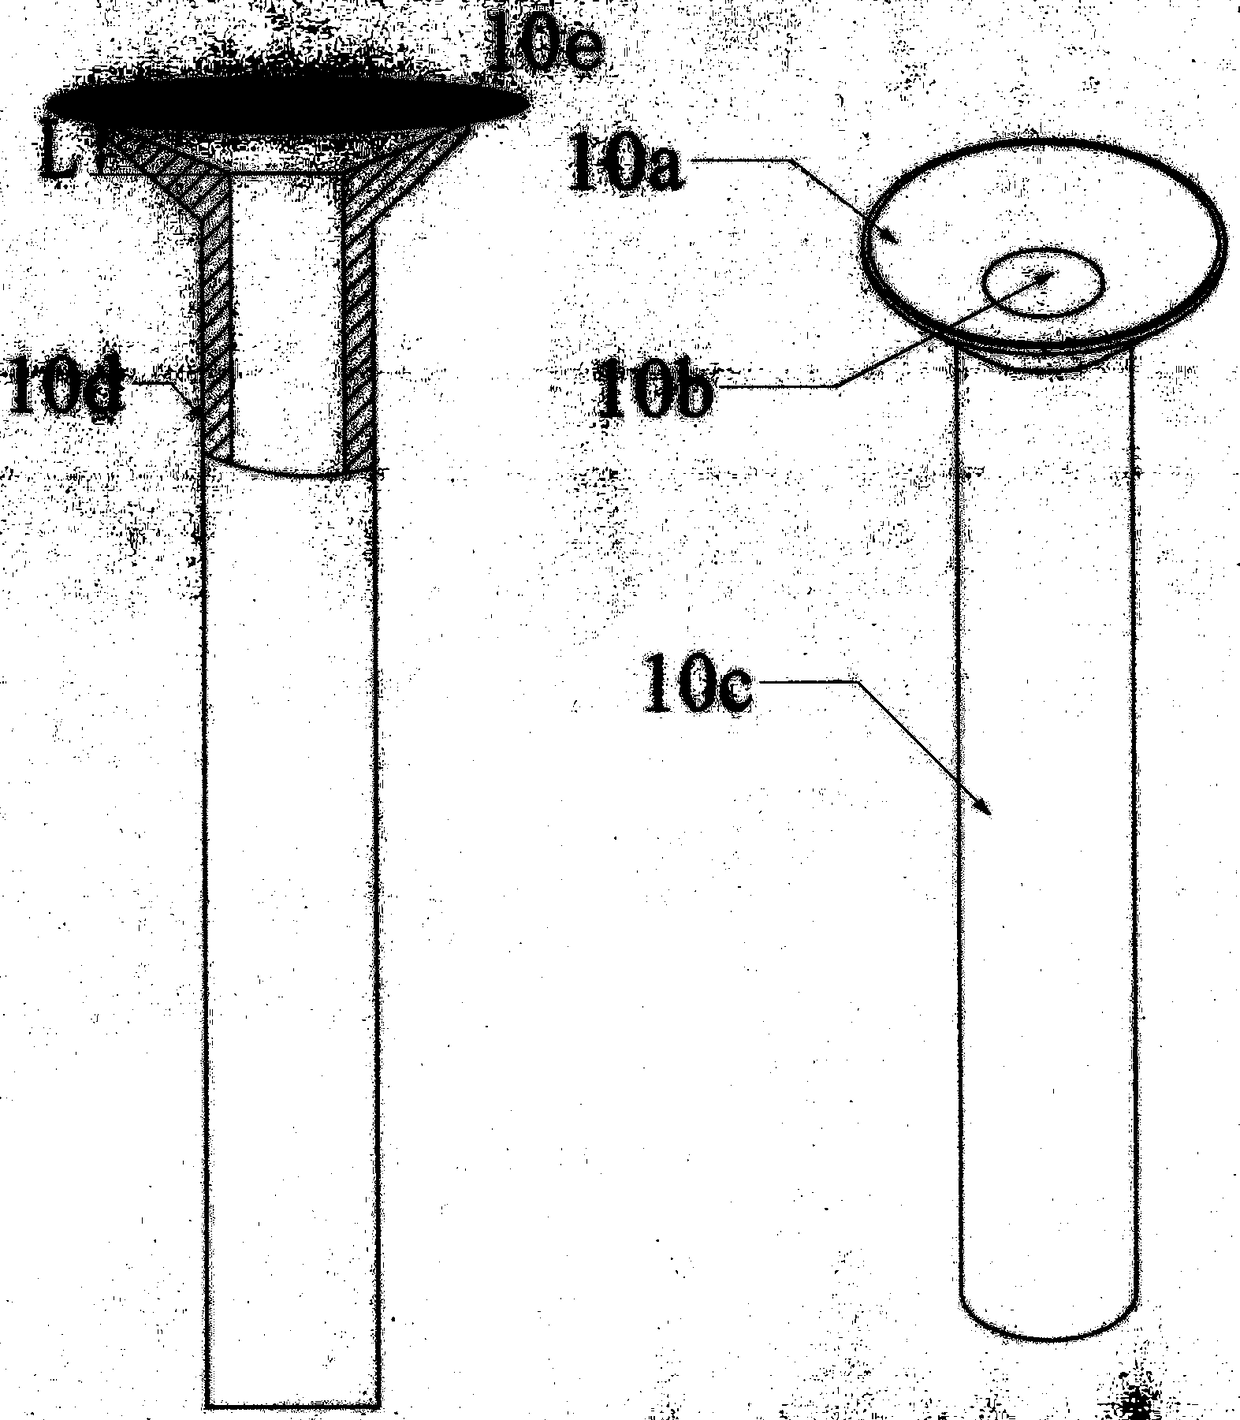 Automatic contact lens care apparatus